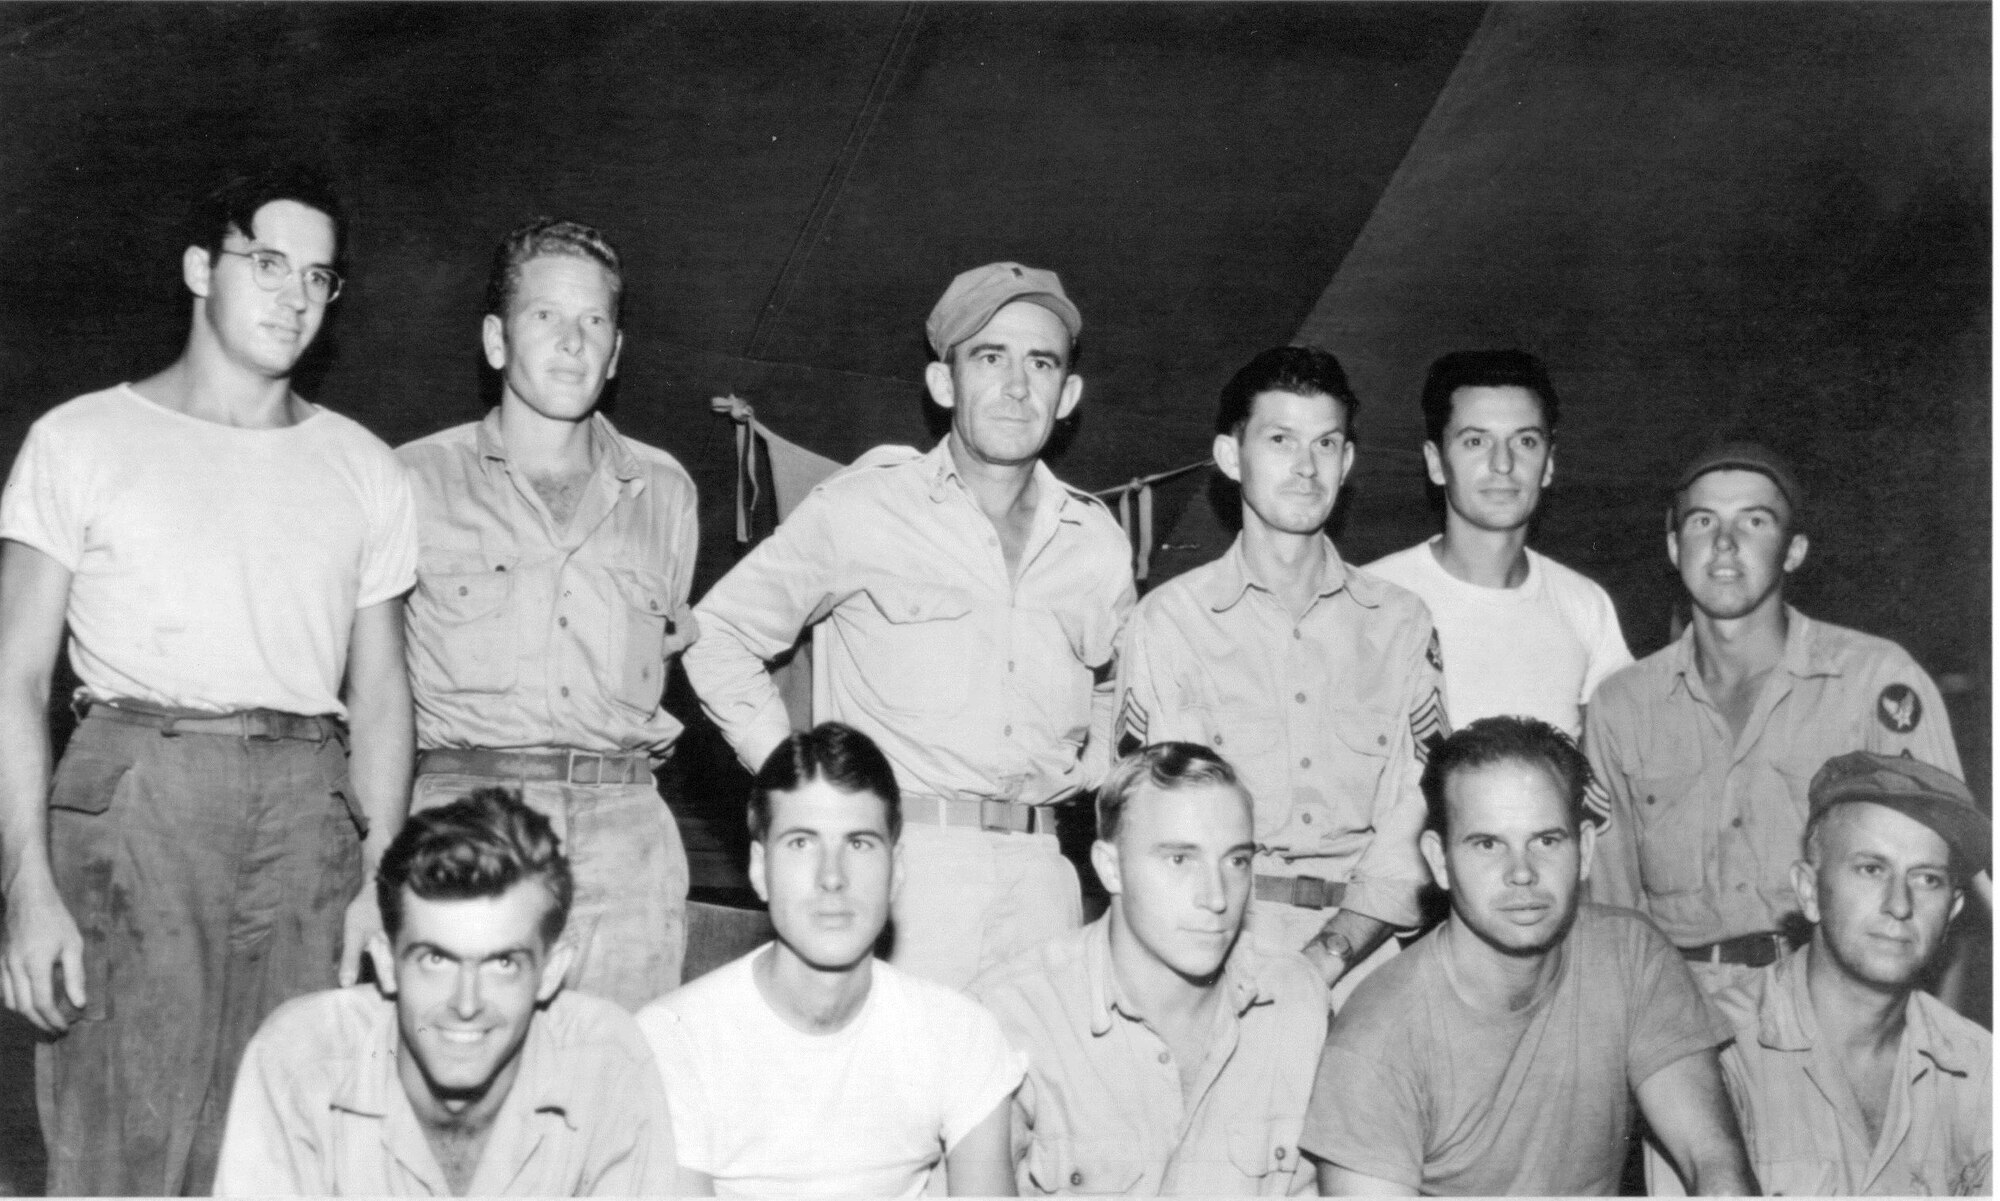 Eleven of Oregon's original Air Guardsmen had a relatively pleasant wartime reunion on the island of Biak, off the northwest coast of New Guinea in the Netherlands East Indies in late September or October of 1944. It was the first gathering between them since leaving Oregon's 123rd Observation Squadron for other air force assignments earlier in the war, as the Army Air Forces reassigned many 123d members to help build up other new air units. Representing five different outfits of the Fifth Air Force, they are (back row, from left), Sgt. Fred H. Hill (17th Reconnaissance Squadron (17RS)), Sgt.Onan S. Beasley, 1st Lt. John P. O'Keefe (a Military Police unit), M/Sgt. Joe H. Weber, S/Sgt. Anthony J. Flabetich, S/Sgt. John L. Donis (110th Tactical Reconnaissance Squadron); (seated, from left) Sgt. Robert W. Casey (17RS), S/Sgt. Robert F. Wall (17RS), S/Sgt. John H. Sopjes (17RS), T/Sgt. Walter M. Barker (17RS) and Pvt. Jack L. Barton. The units the other men belonged to are unknown; there were several units based on Biak in this period, including the 71st Tactical Reconnaissance Group, 345th Bomb Group (Medium) and the 475th Fighter Group.  (142FW Archives)